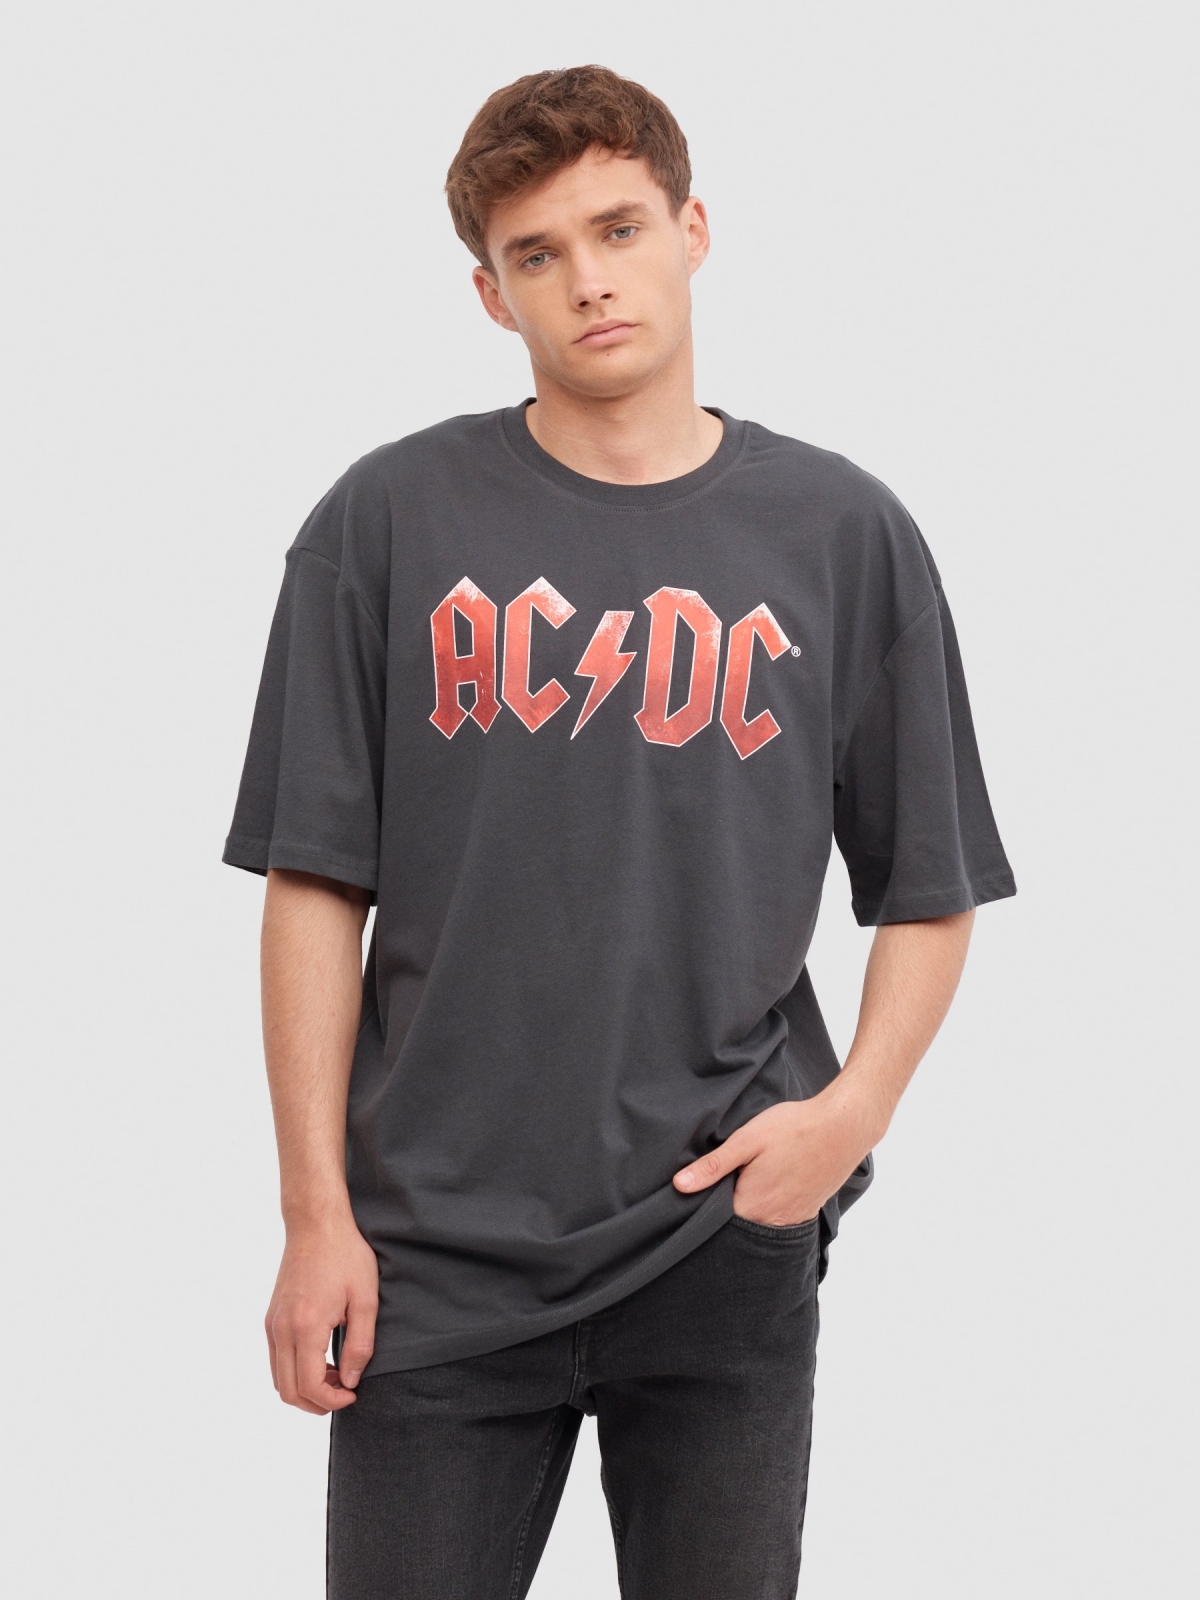 AC/DC t-shirt dark grey middle front view